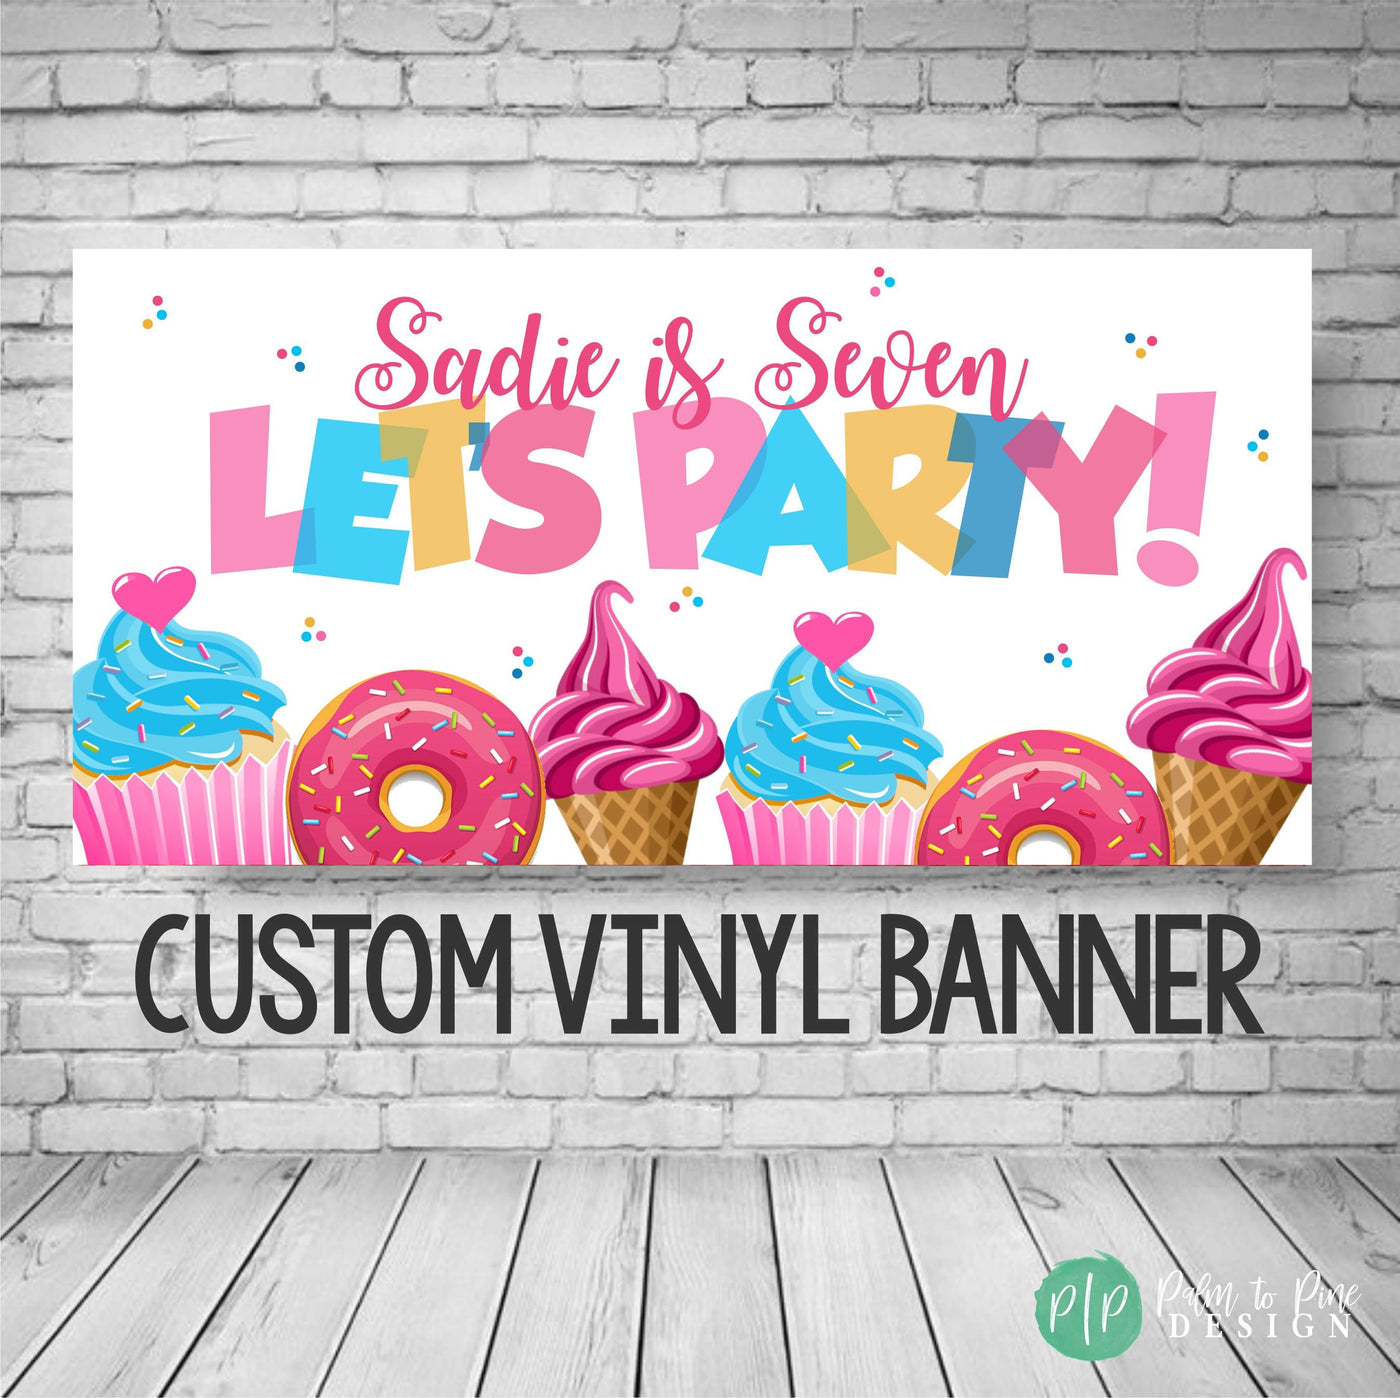 Let's Party Banner, Summer Birthday Party, Ice Cream Party, Donut Birthday, Girls Birthday Party, Outdoor Banner, Personalized Vinyl Banner